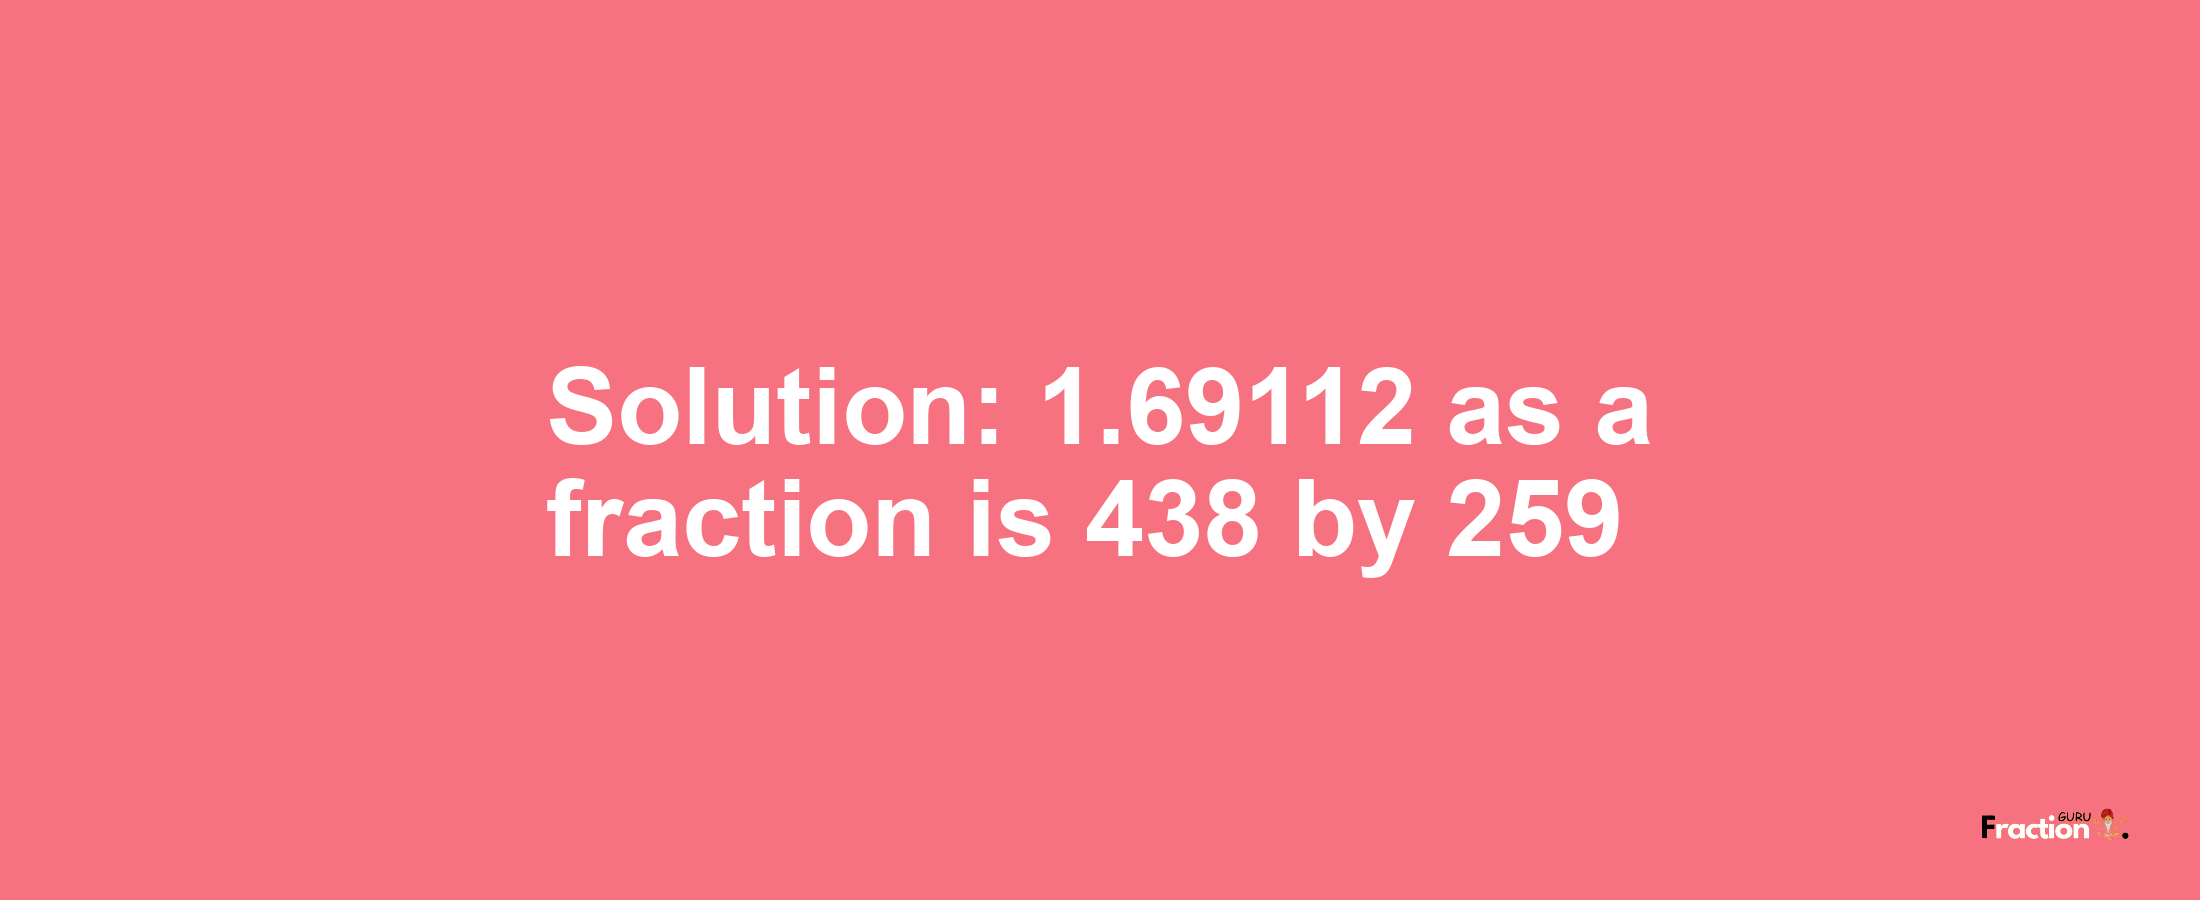 Solution:1.69112 as a fraction is 438/259